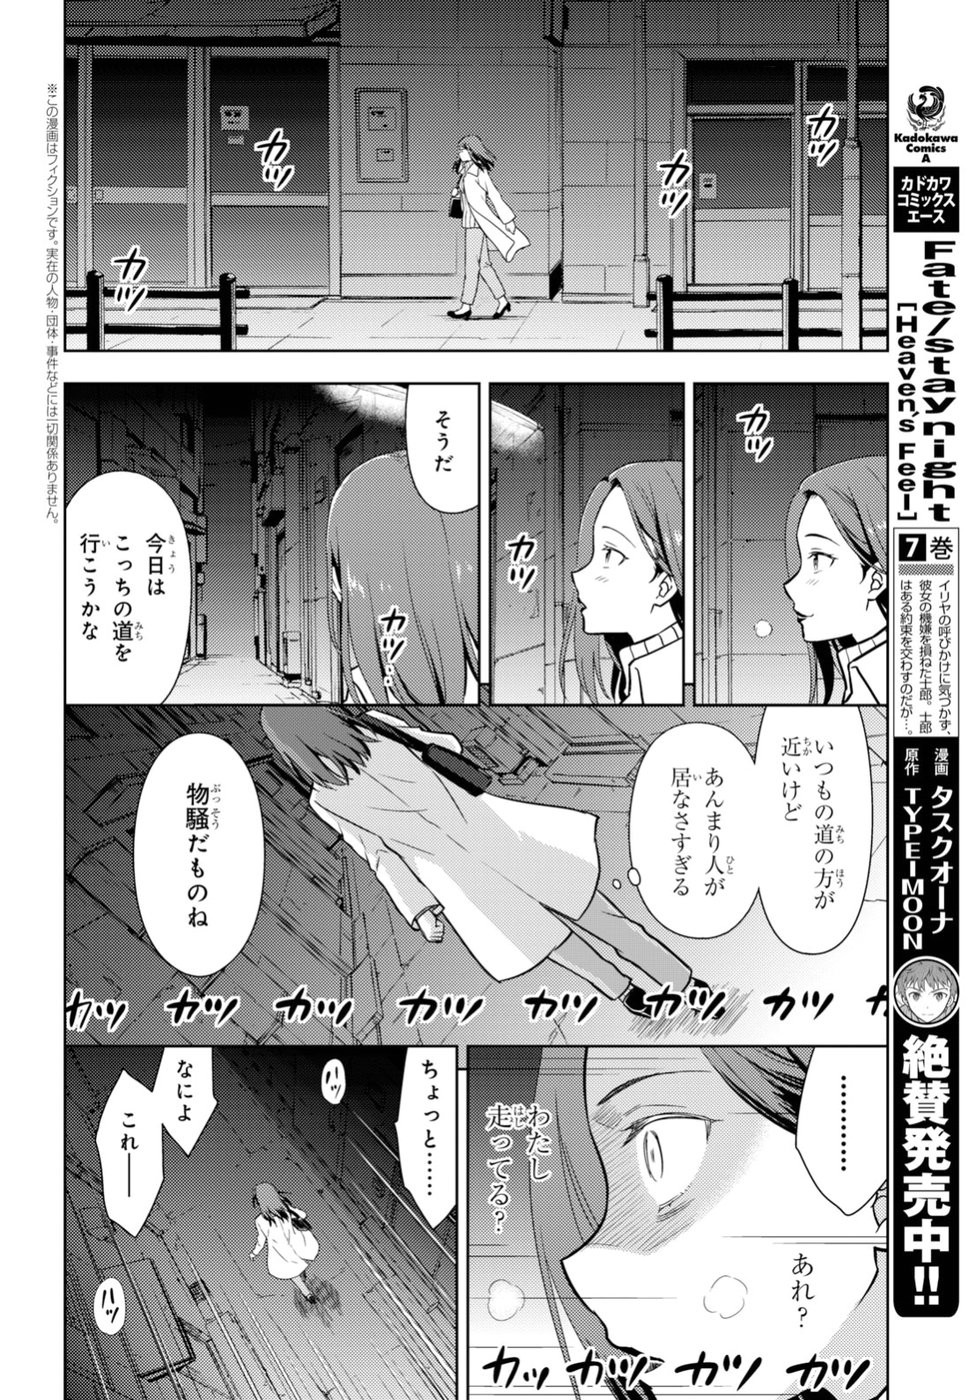 Fate/Stay night Heaven's Feel - Chapter 46 - Page 2